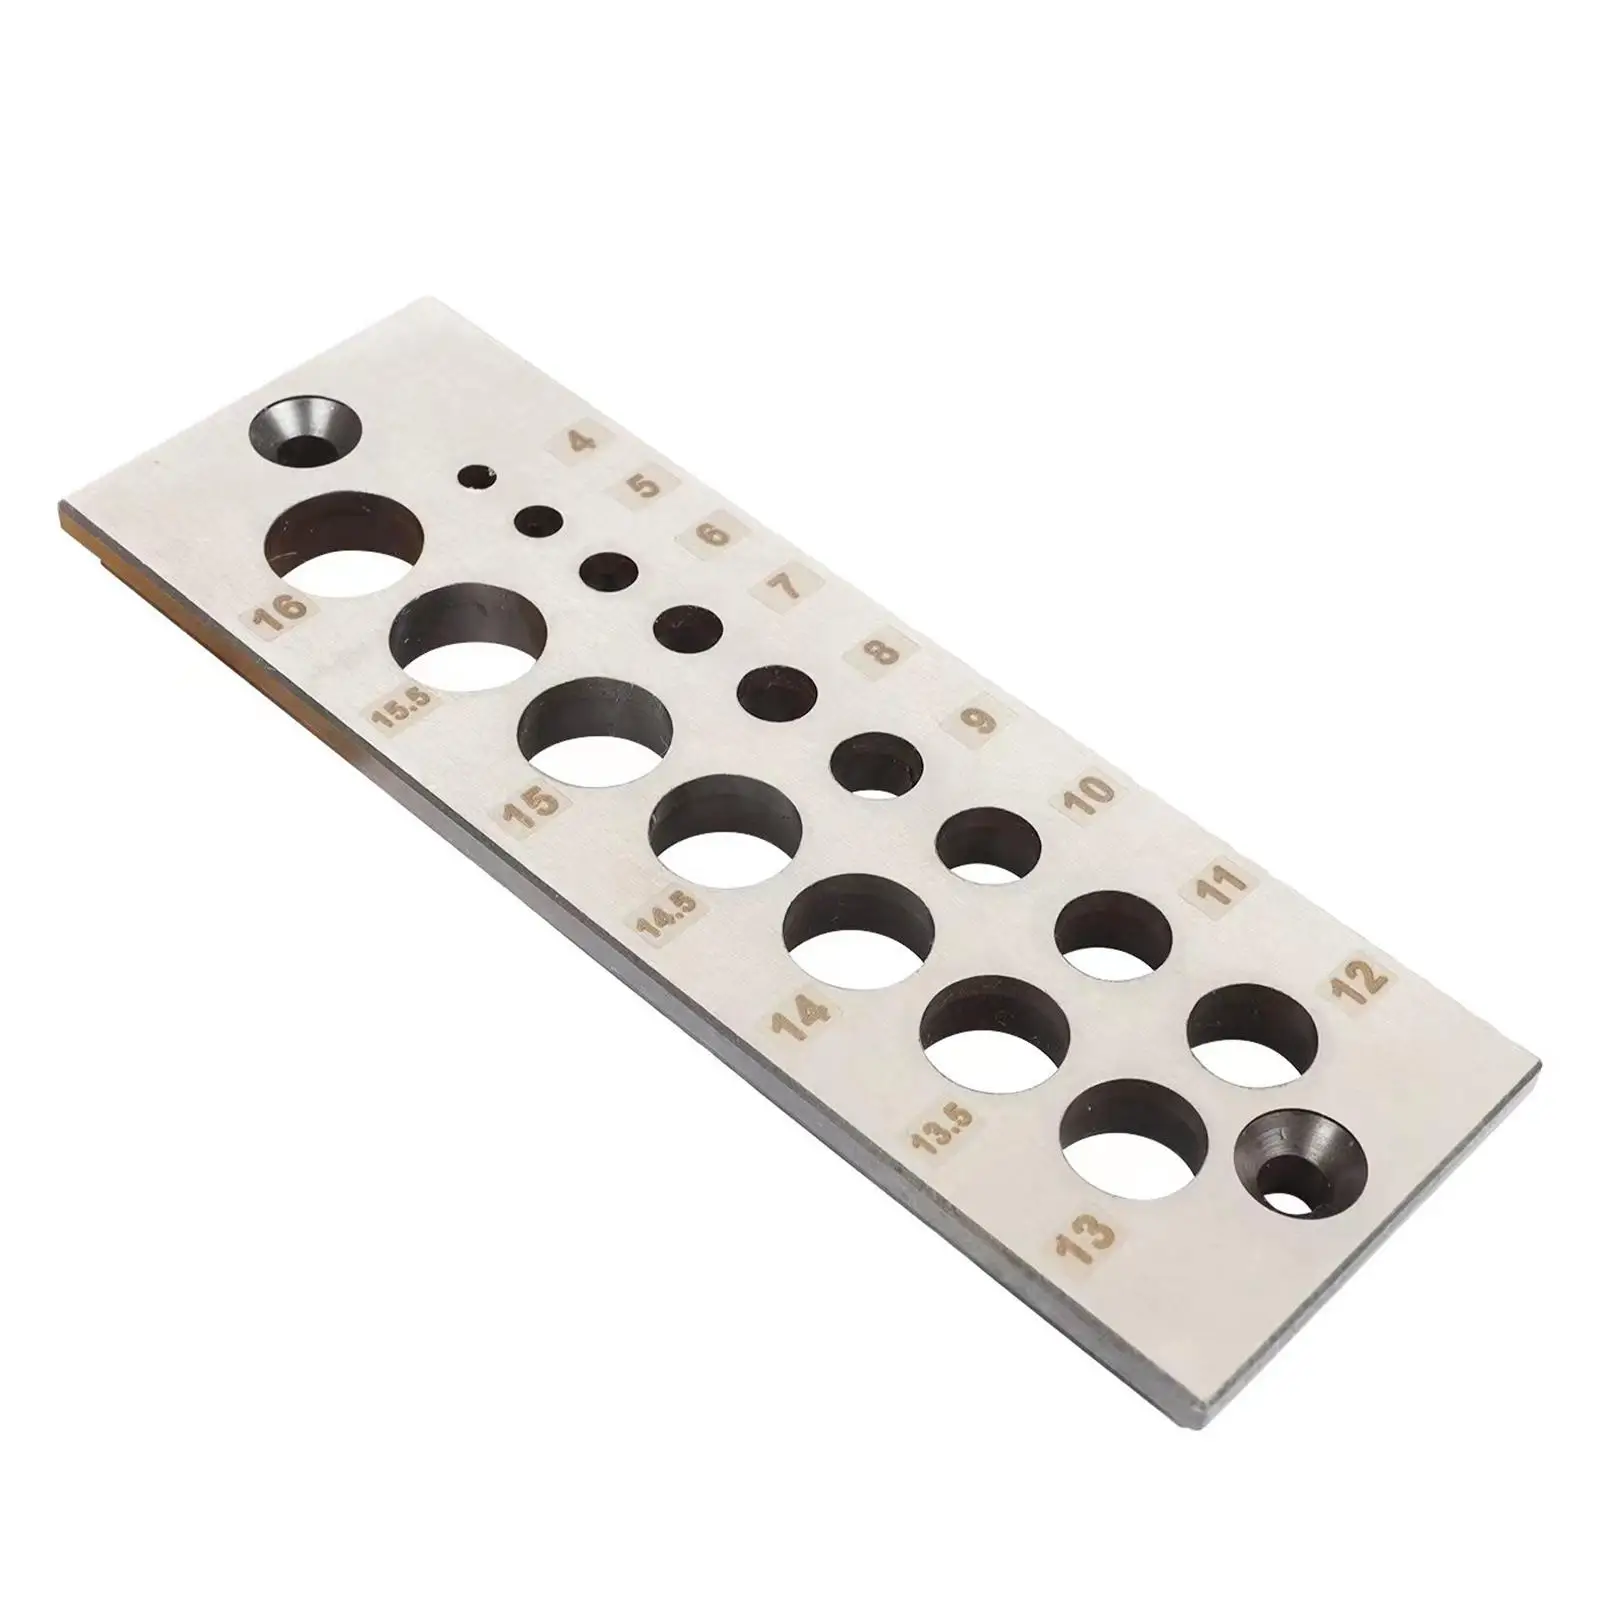 17 Holes Dowel Maker with Scores Practical Fasteners for Industrial Woodworking